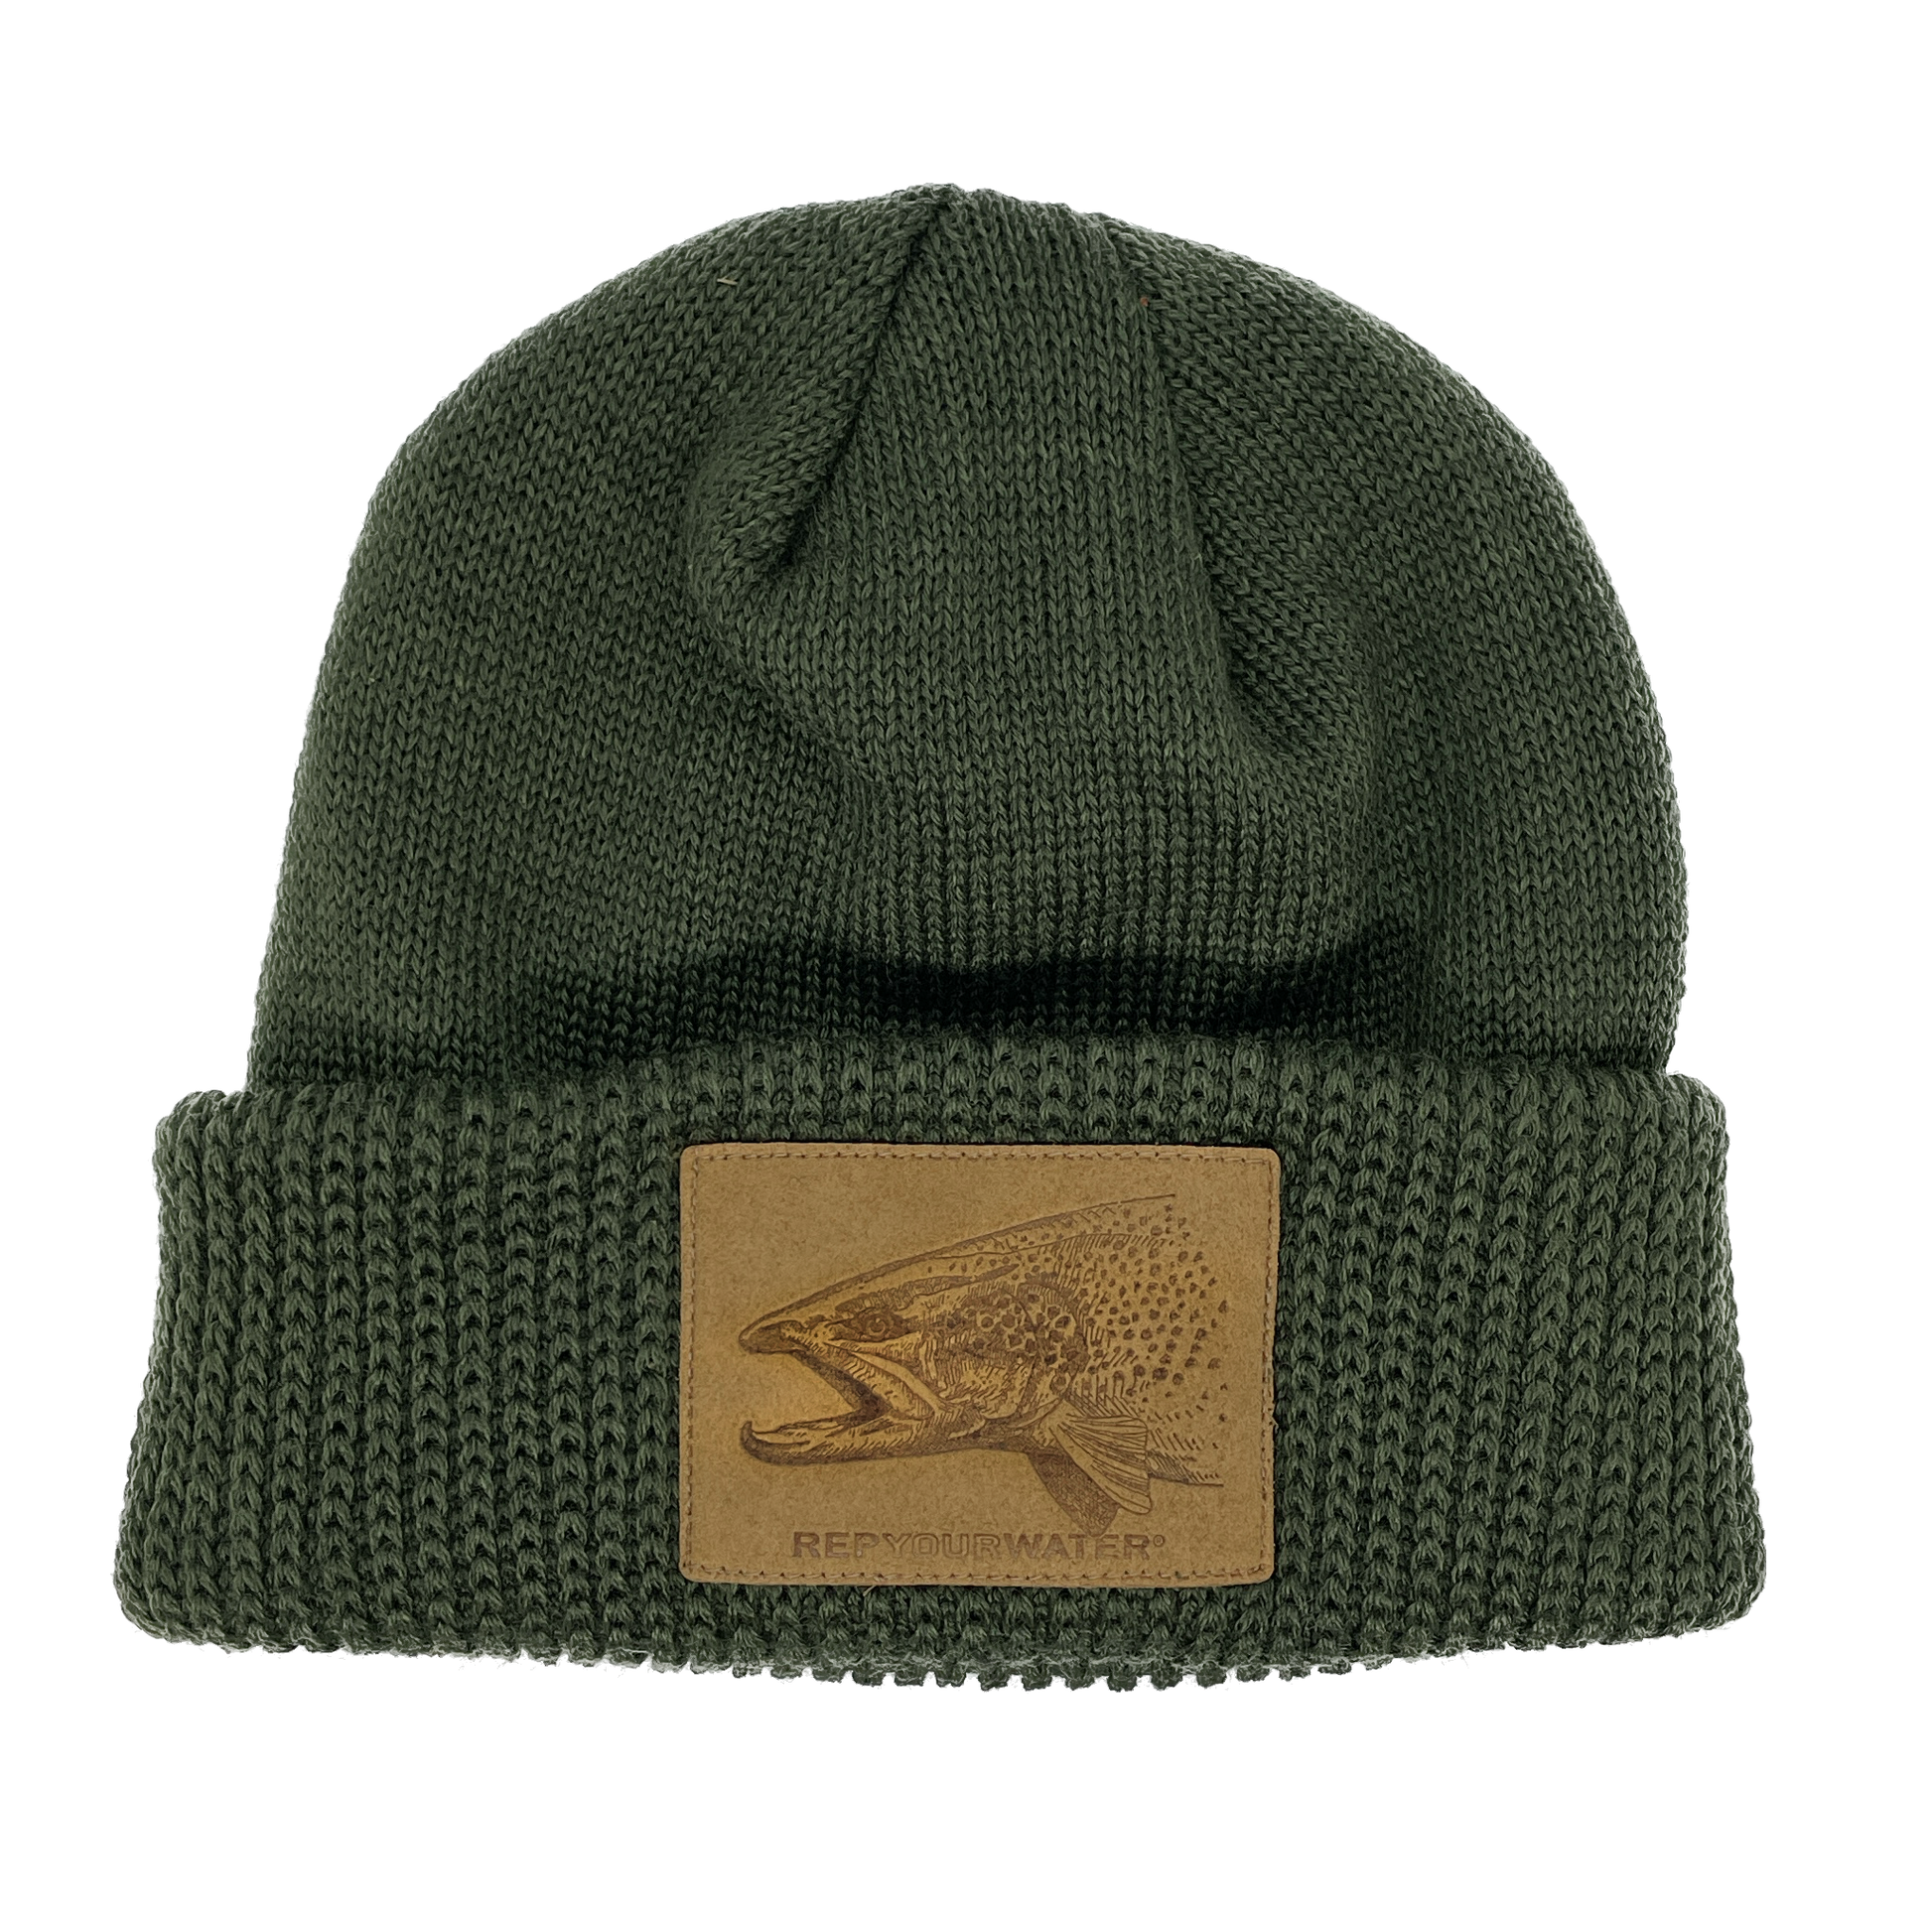 A green winter hat with a cuff has a suede patch featuring a brown trout head on it